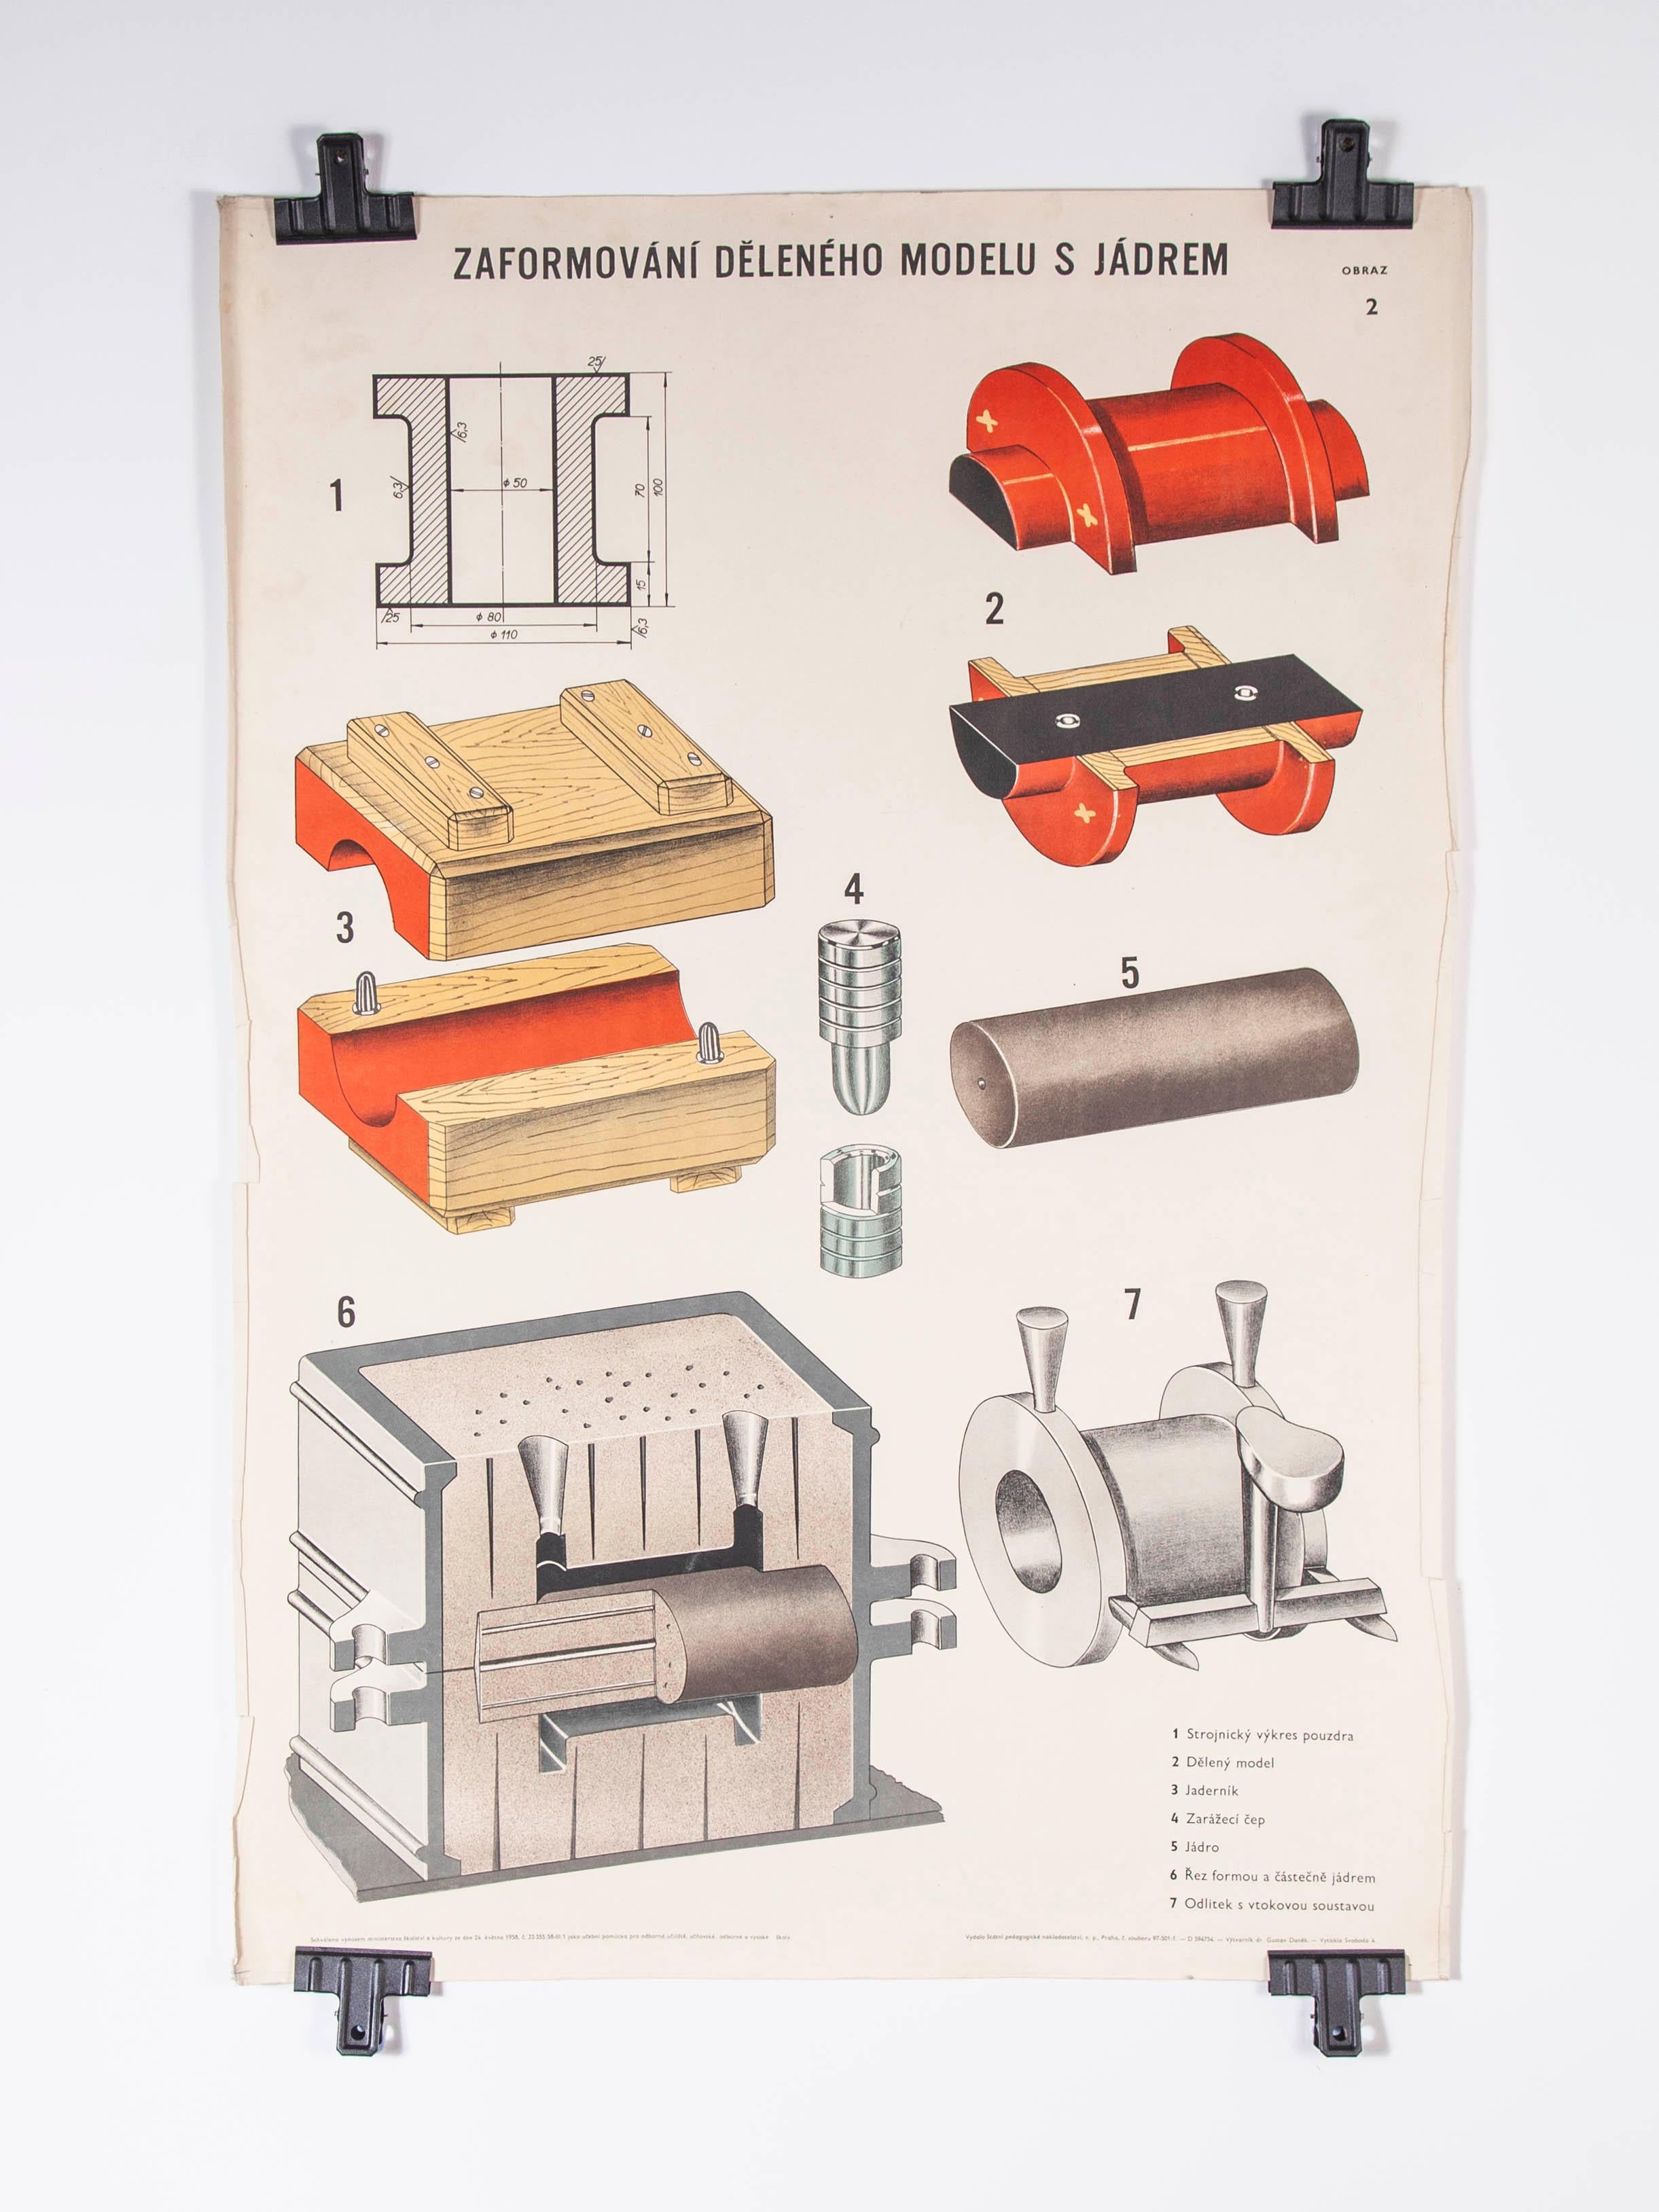 Czech technical industrial drawing – foundry mould engineering poster – 7

Sourced from an old engineering workshop in the Czech Republic, an amazing series of technical Industrial drawings explaining the process of sand casting and creating the